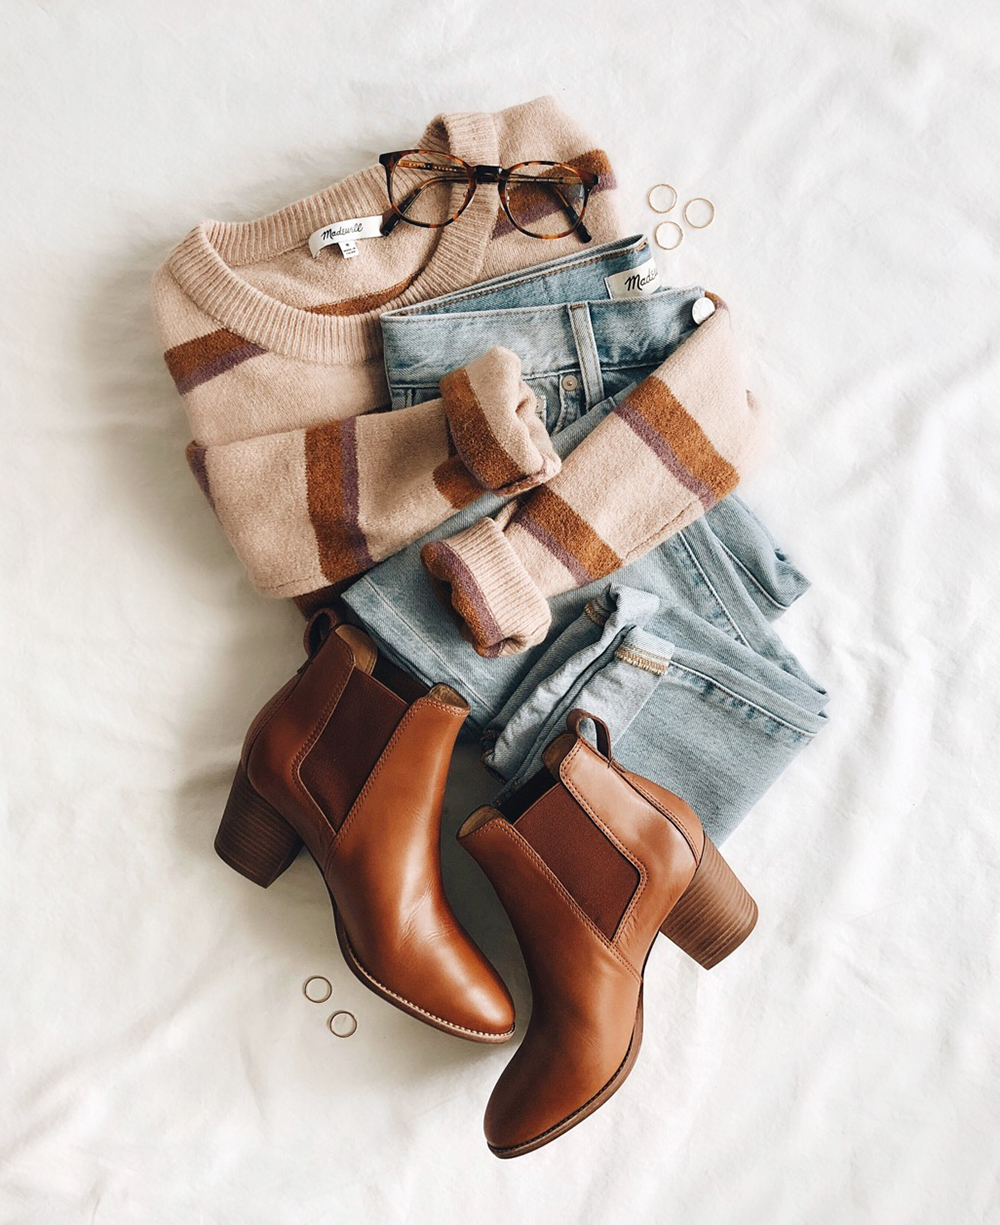 livvyland-blog-olivia-watson-best-cyber-monday-sales-madewell-raglan-boots-striped-sweater-outfit